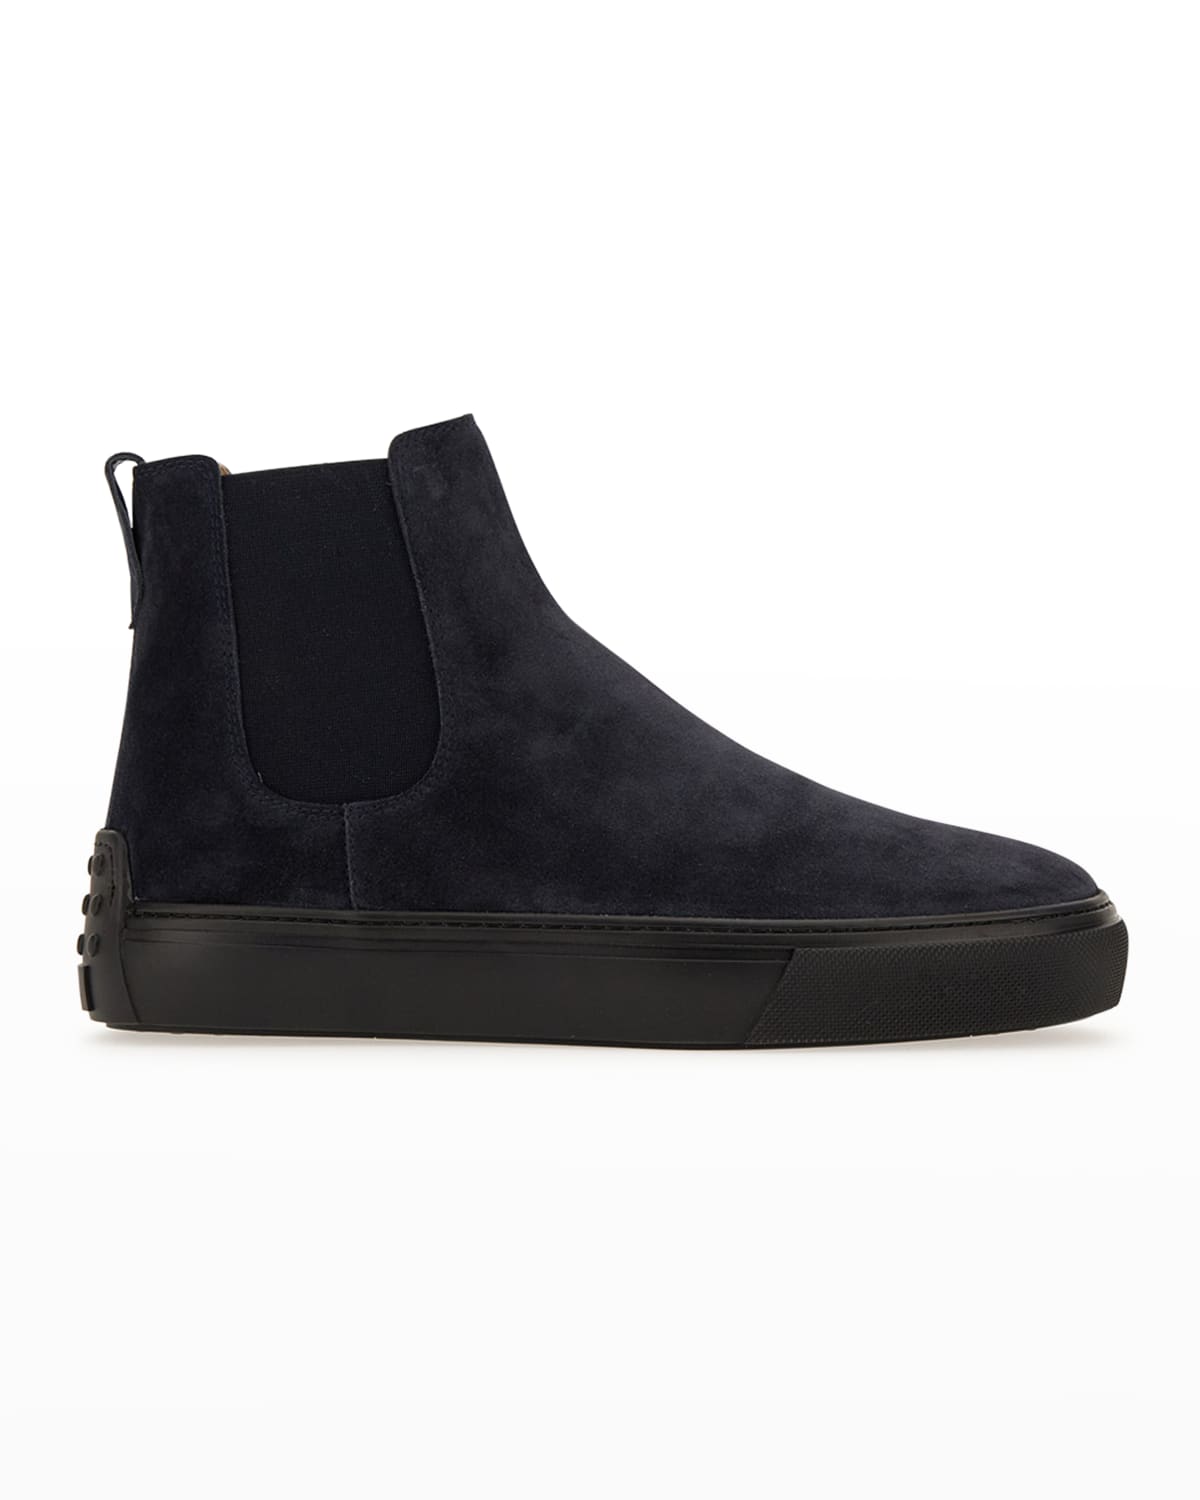 Tod's Men's Two-Tone Suede Chelsea Boots